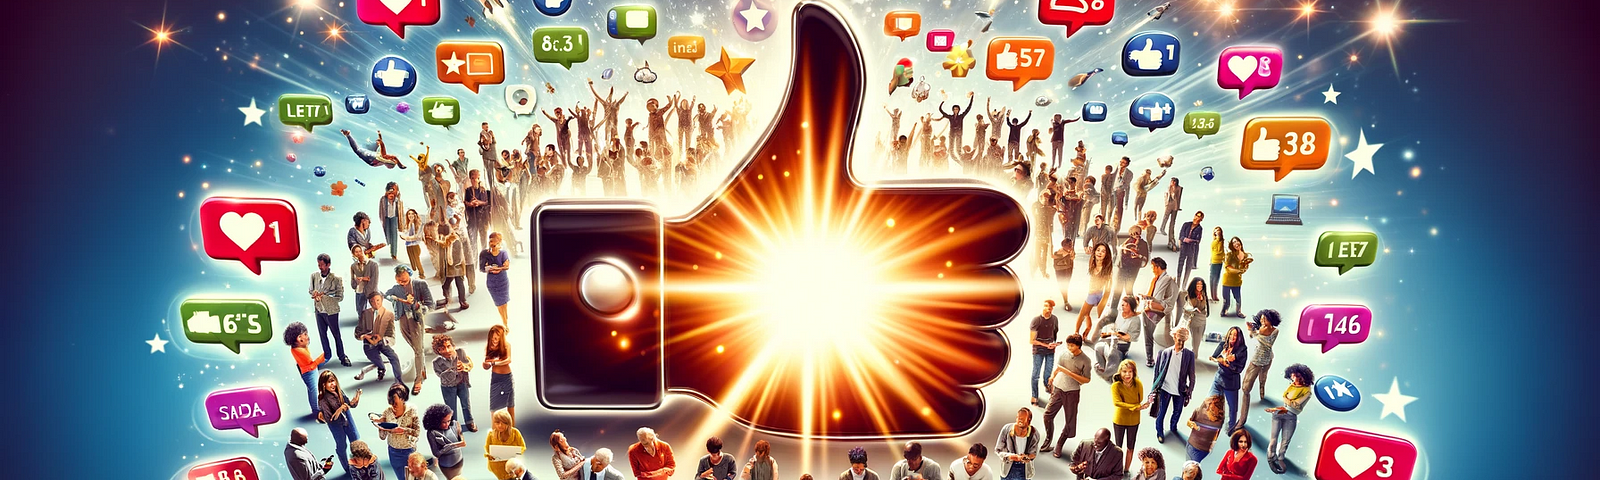 A vibrant depiction of people from different backgrounds engaging with digital content on various devices, encircled by a central ‘thumbs up’ sign, highlighting the essence of social proof in the digital realm.